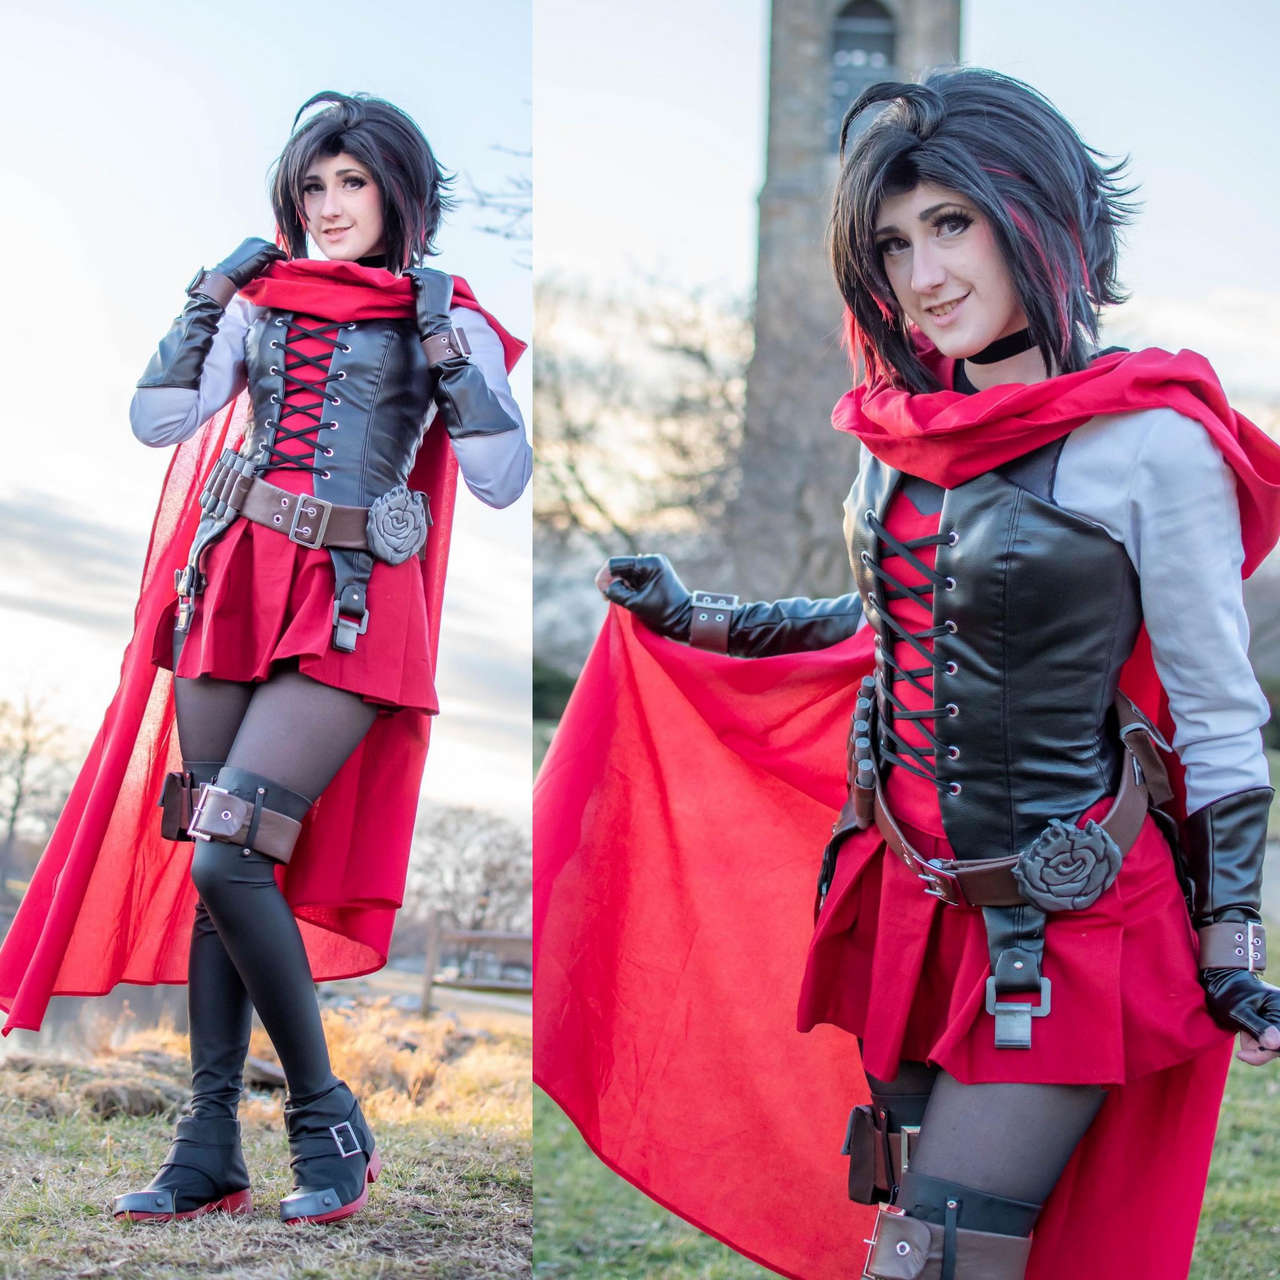 V7 Ruby Rose Cosplay Made By Mangolo